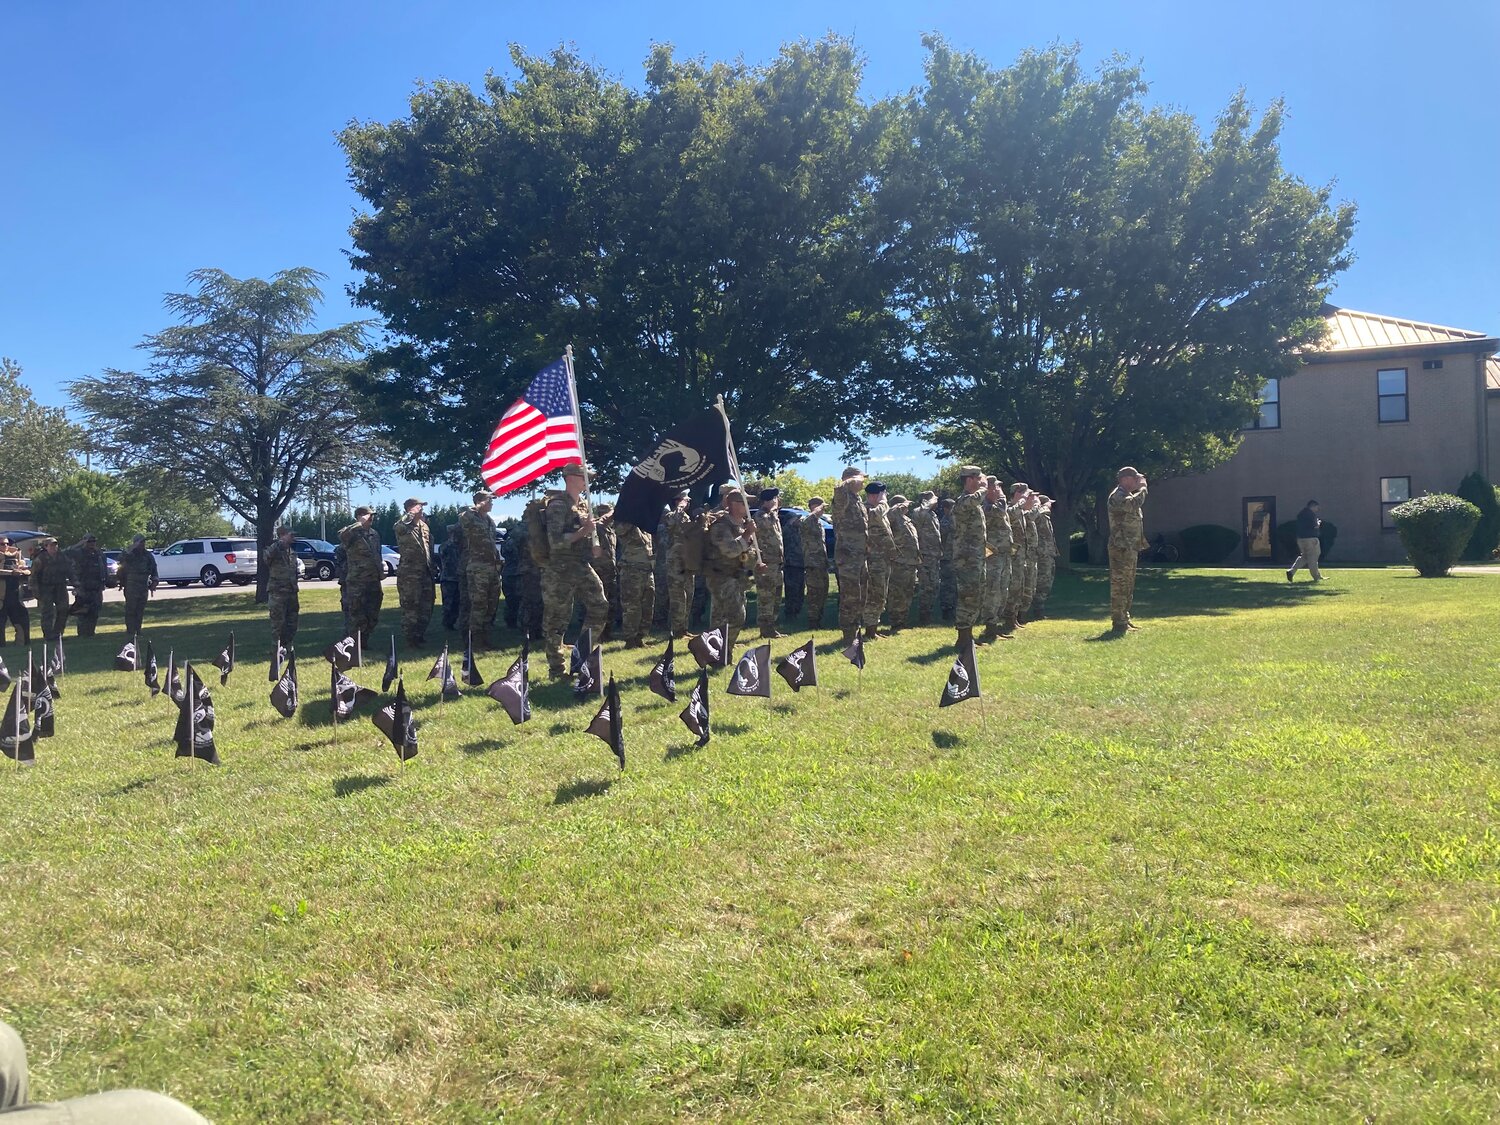 A 50-person formation salutes the United States and POW/MIA flags as they pass by during a ceremony at Dover Air Force Base on Friday afternoon.